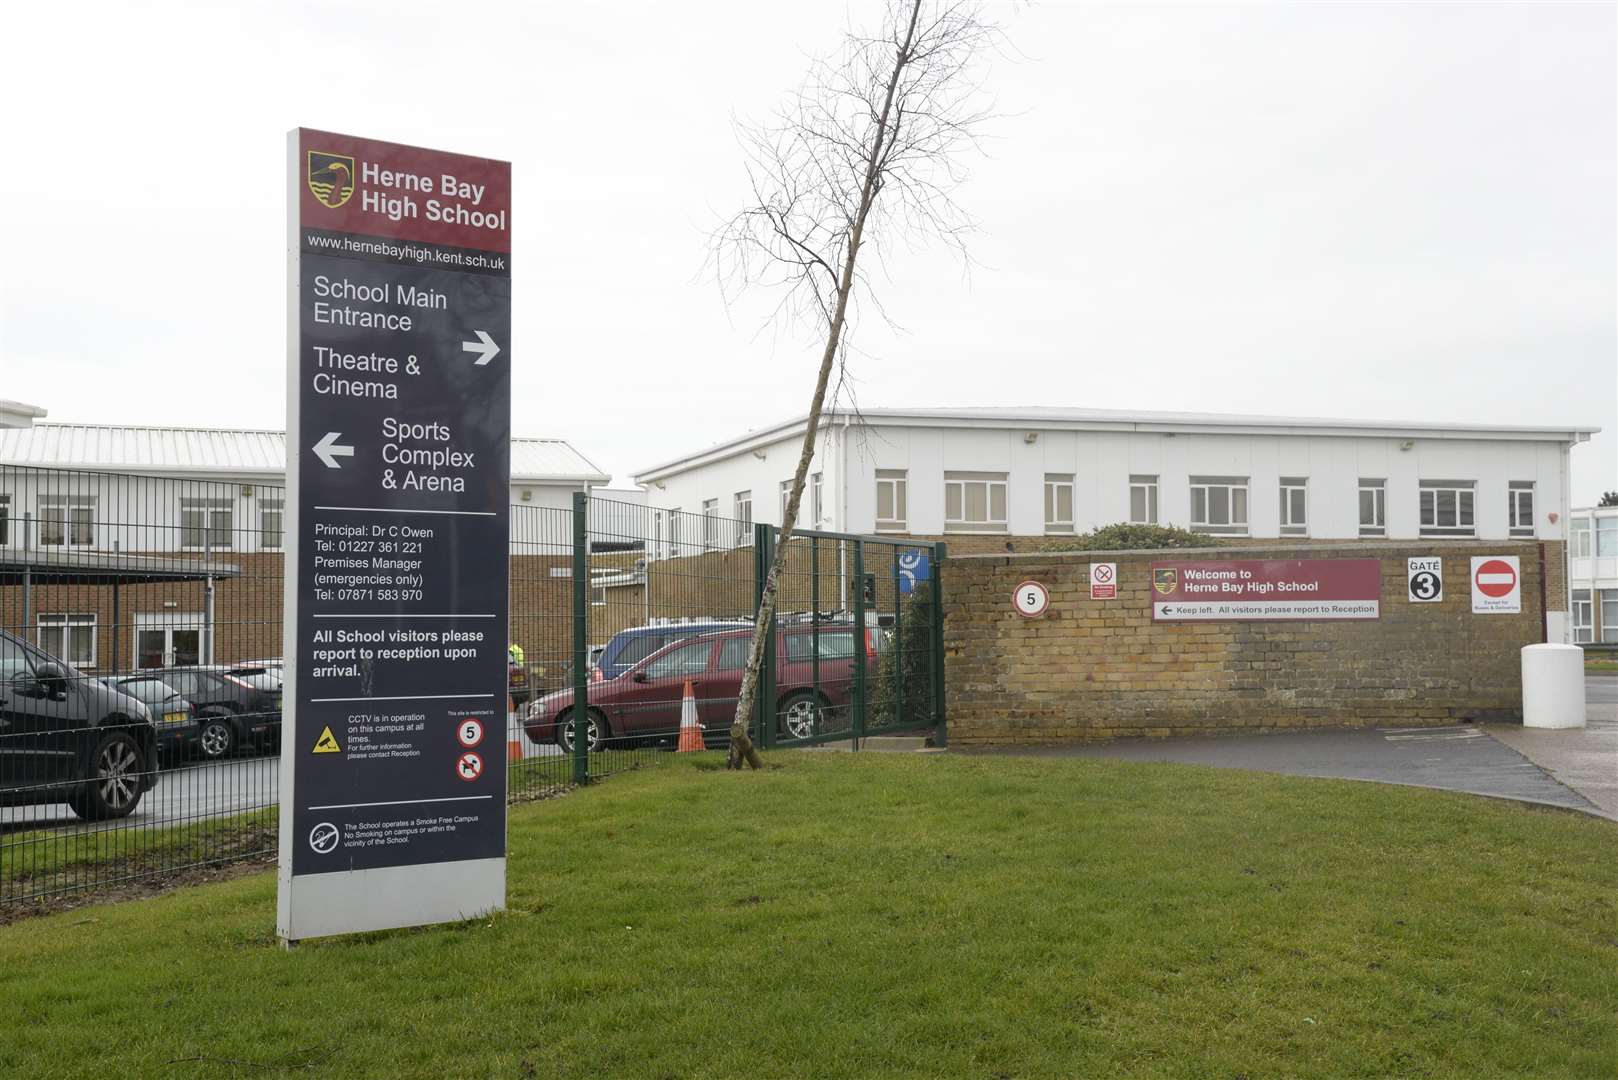 Year 10 pupils at Herne Bay High School have been told to self-isolate